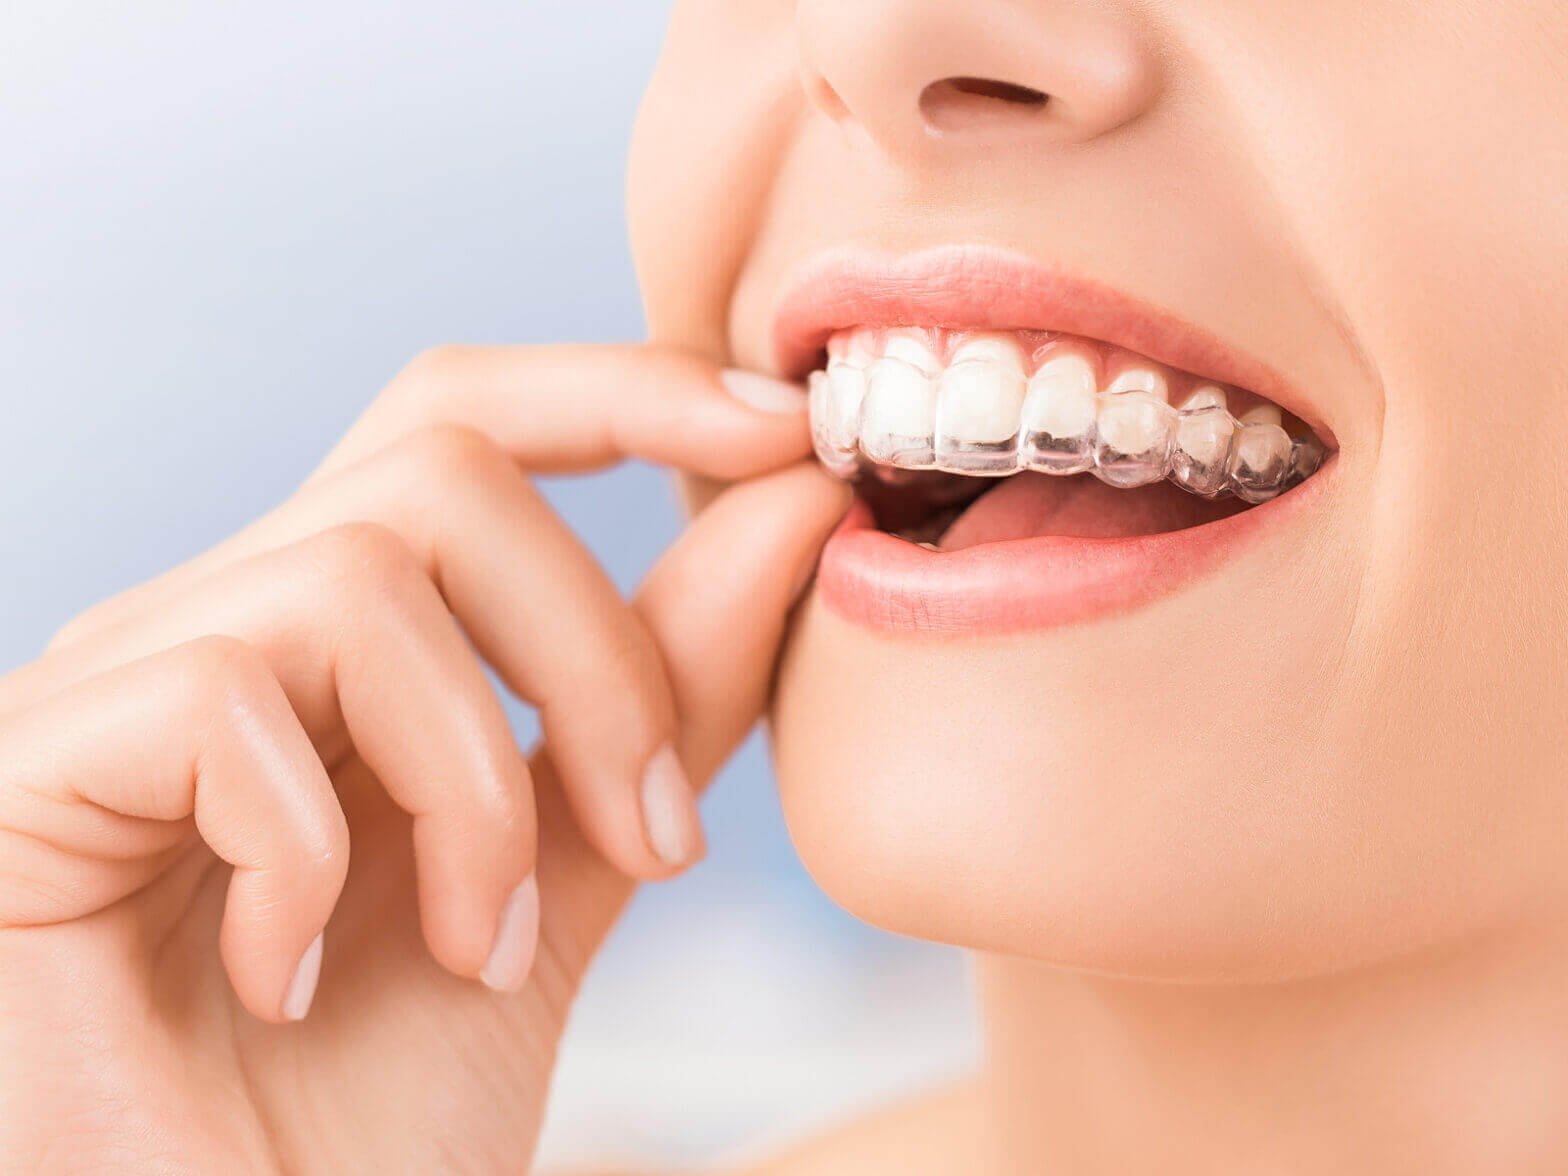 Does Invisalign Impact Your Diet